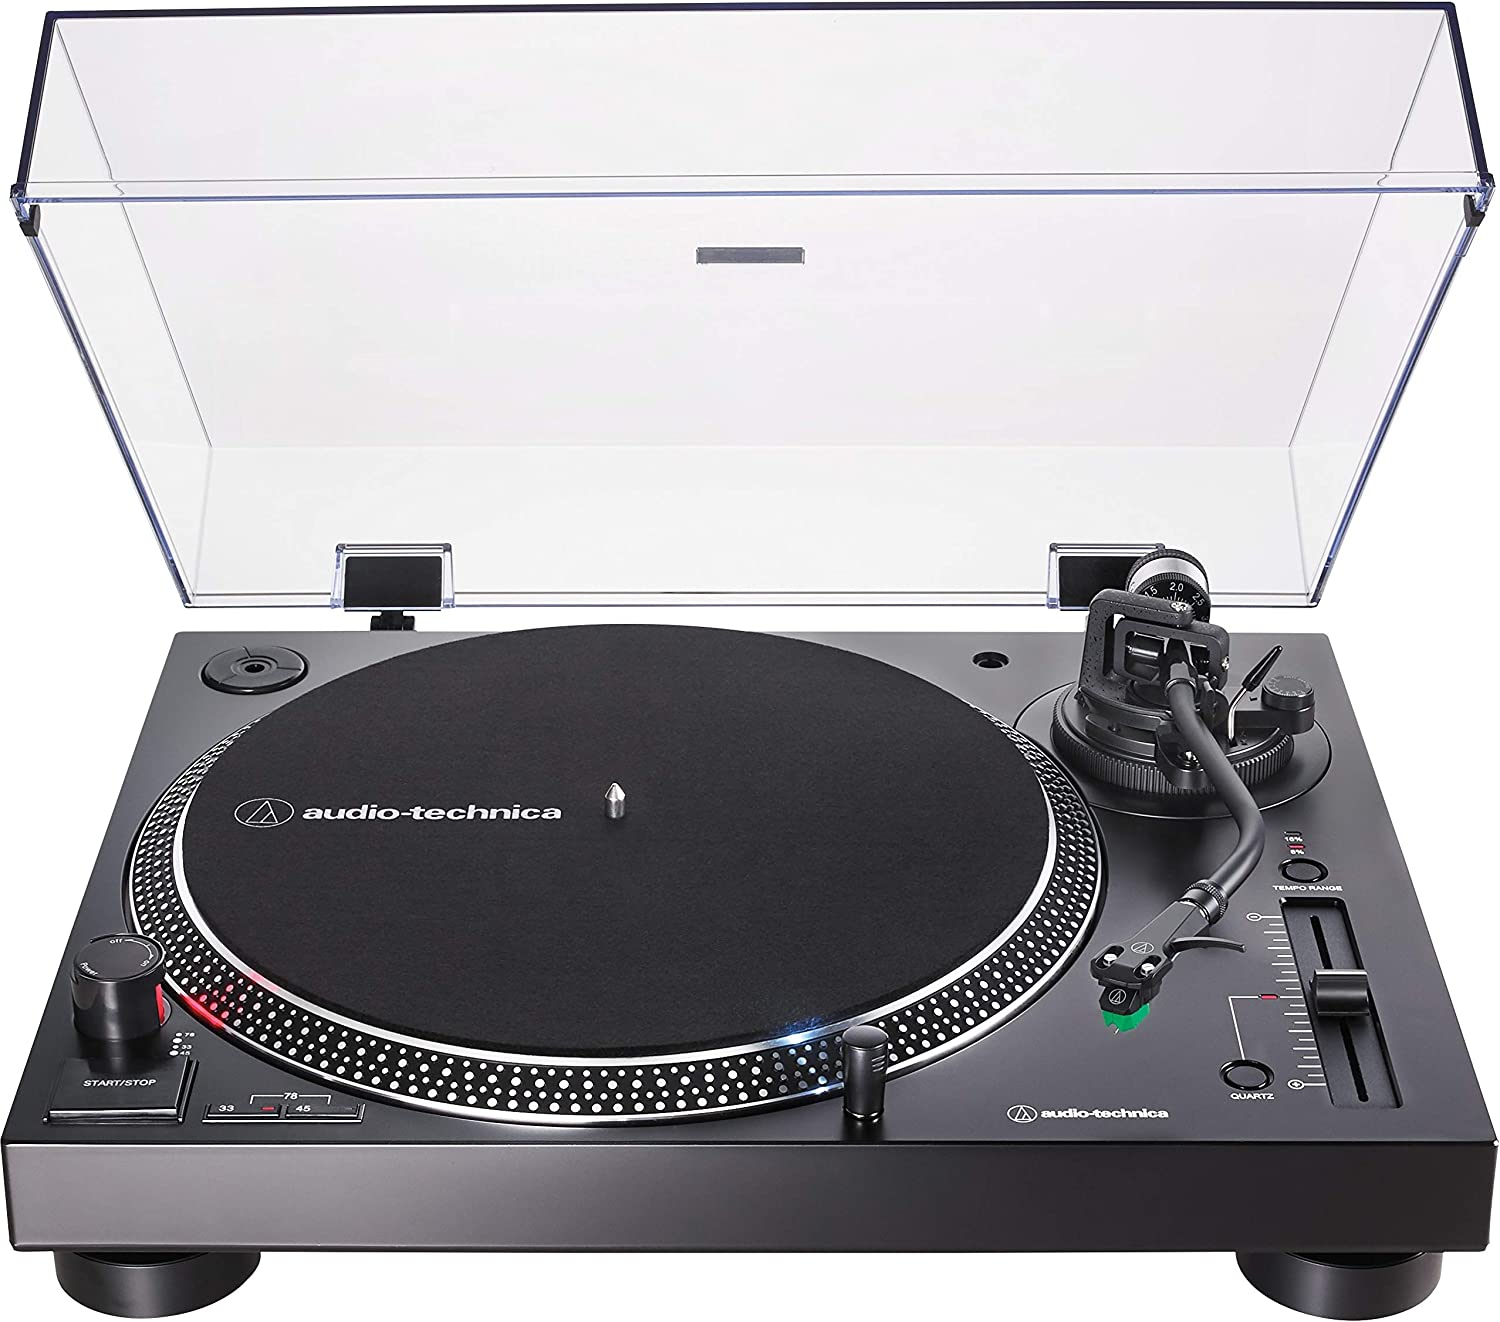 Audio-Technica AT-LP120XUSB-BK Direct-Drive Turntable (Analog & USB), Fully Manual, Hi-Fi, 3 Speed, Convert Vinyl to Digital, Anti-Skate and Variable Pitch Authority Black